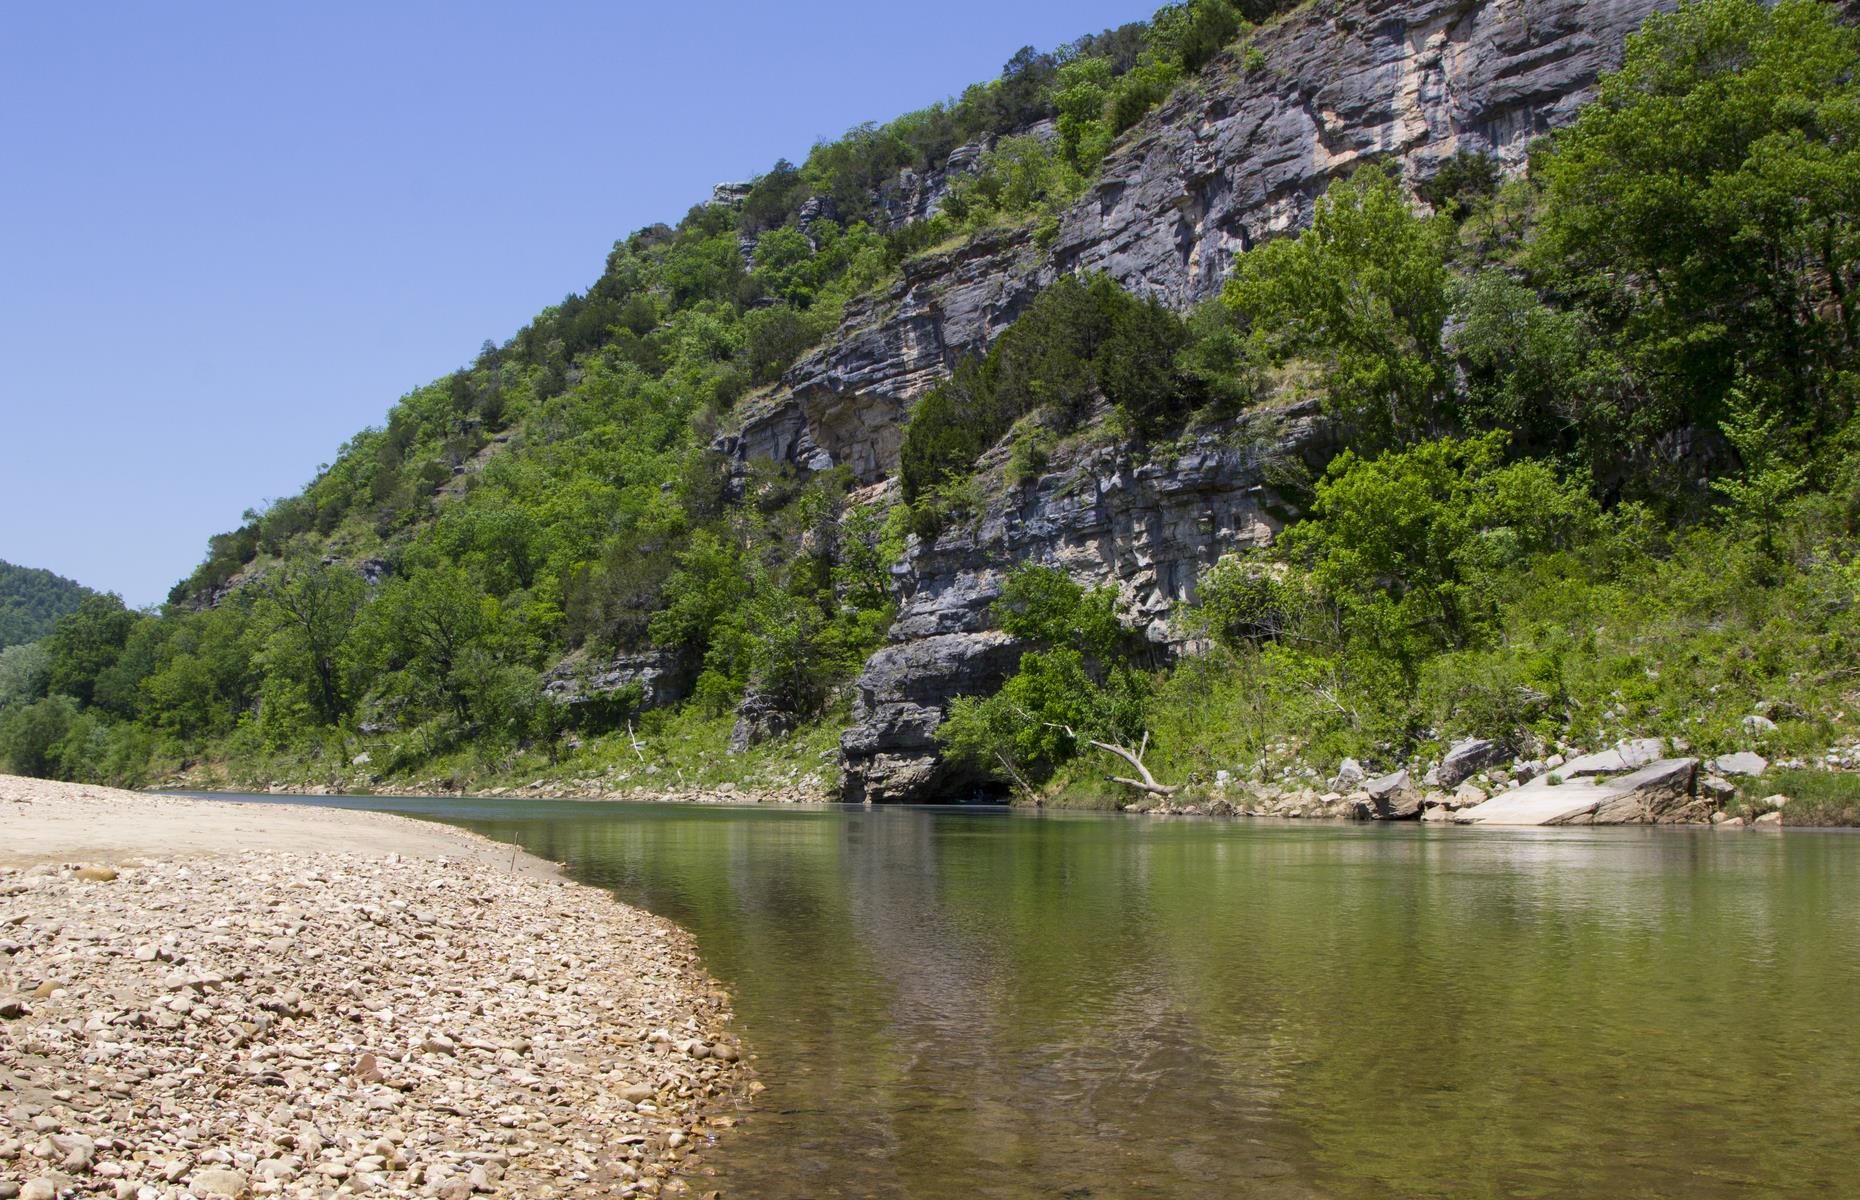 <p>It takes a three-mile (5km) bumpy gravel road to reach <a href="https://www.nps.gov/buff/planyourvisit/camping.htm">Ozark Campground</a> but those who make the effort won’t regret it. The 31 sites are right by the edge of Arkansas’ Buffalo National River which winds, crashes and pools for 135 miles (217km) through the Ozark Mountains. The campground is fairly basic but there are restrooms, picnic tables and fire rings. The location more than makes up for it, though, with direct water access plus caverns and a pale turquoise swimming hole just a few strokes away.</p>